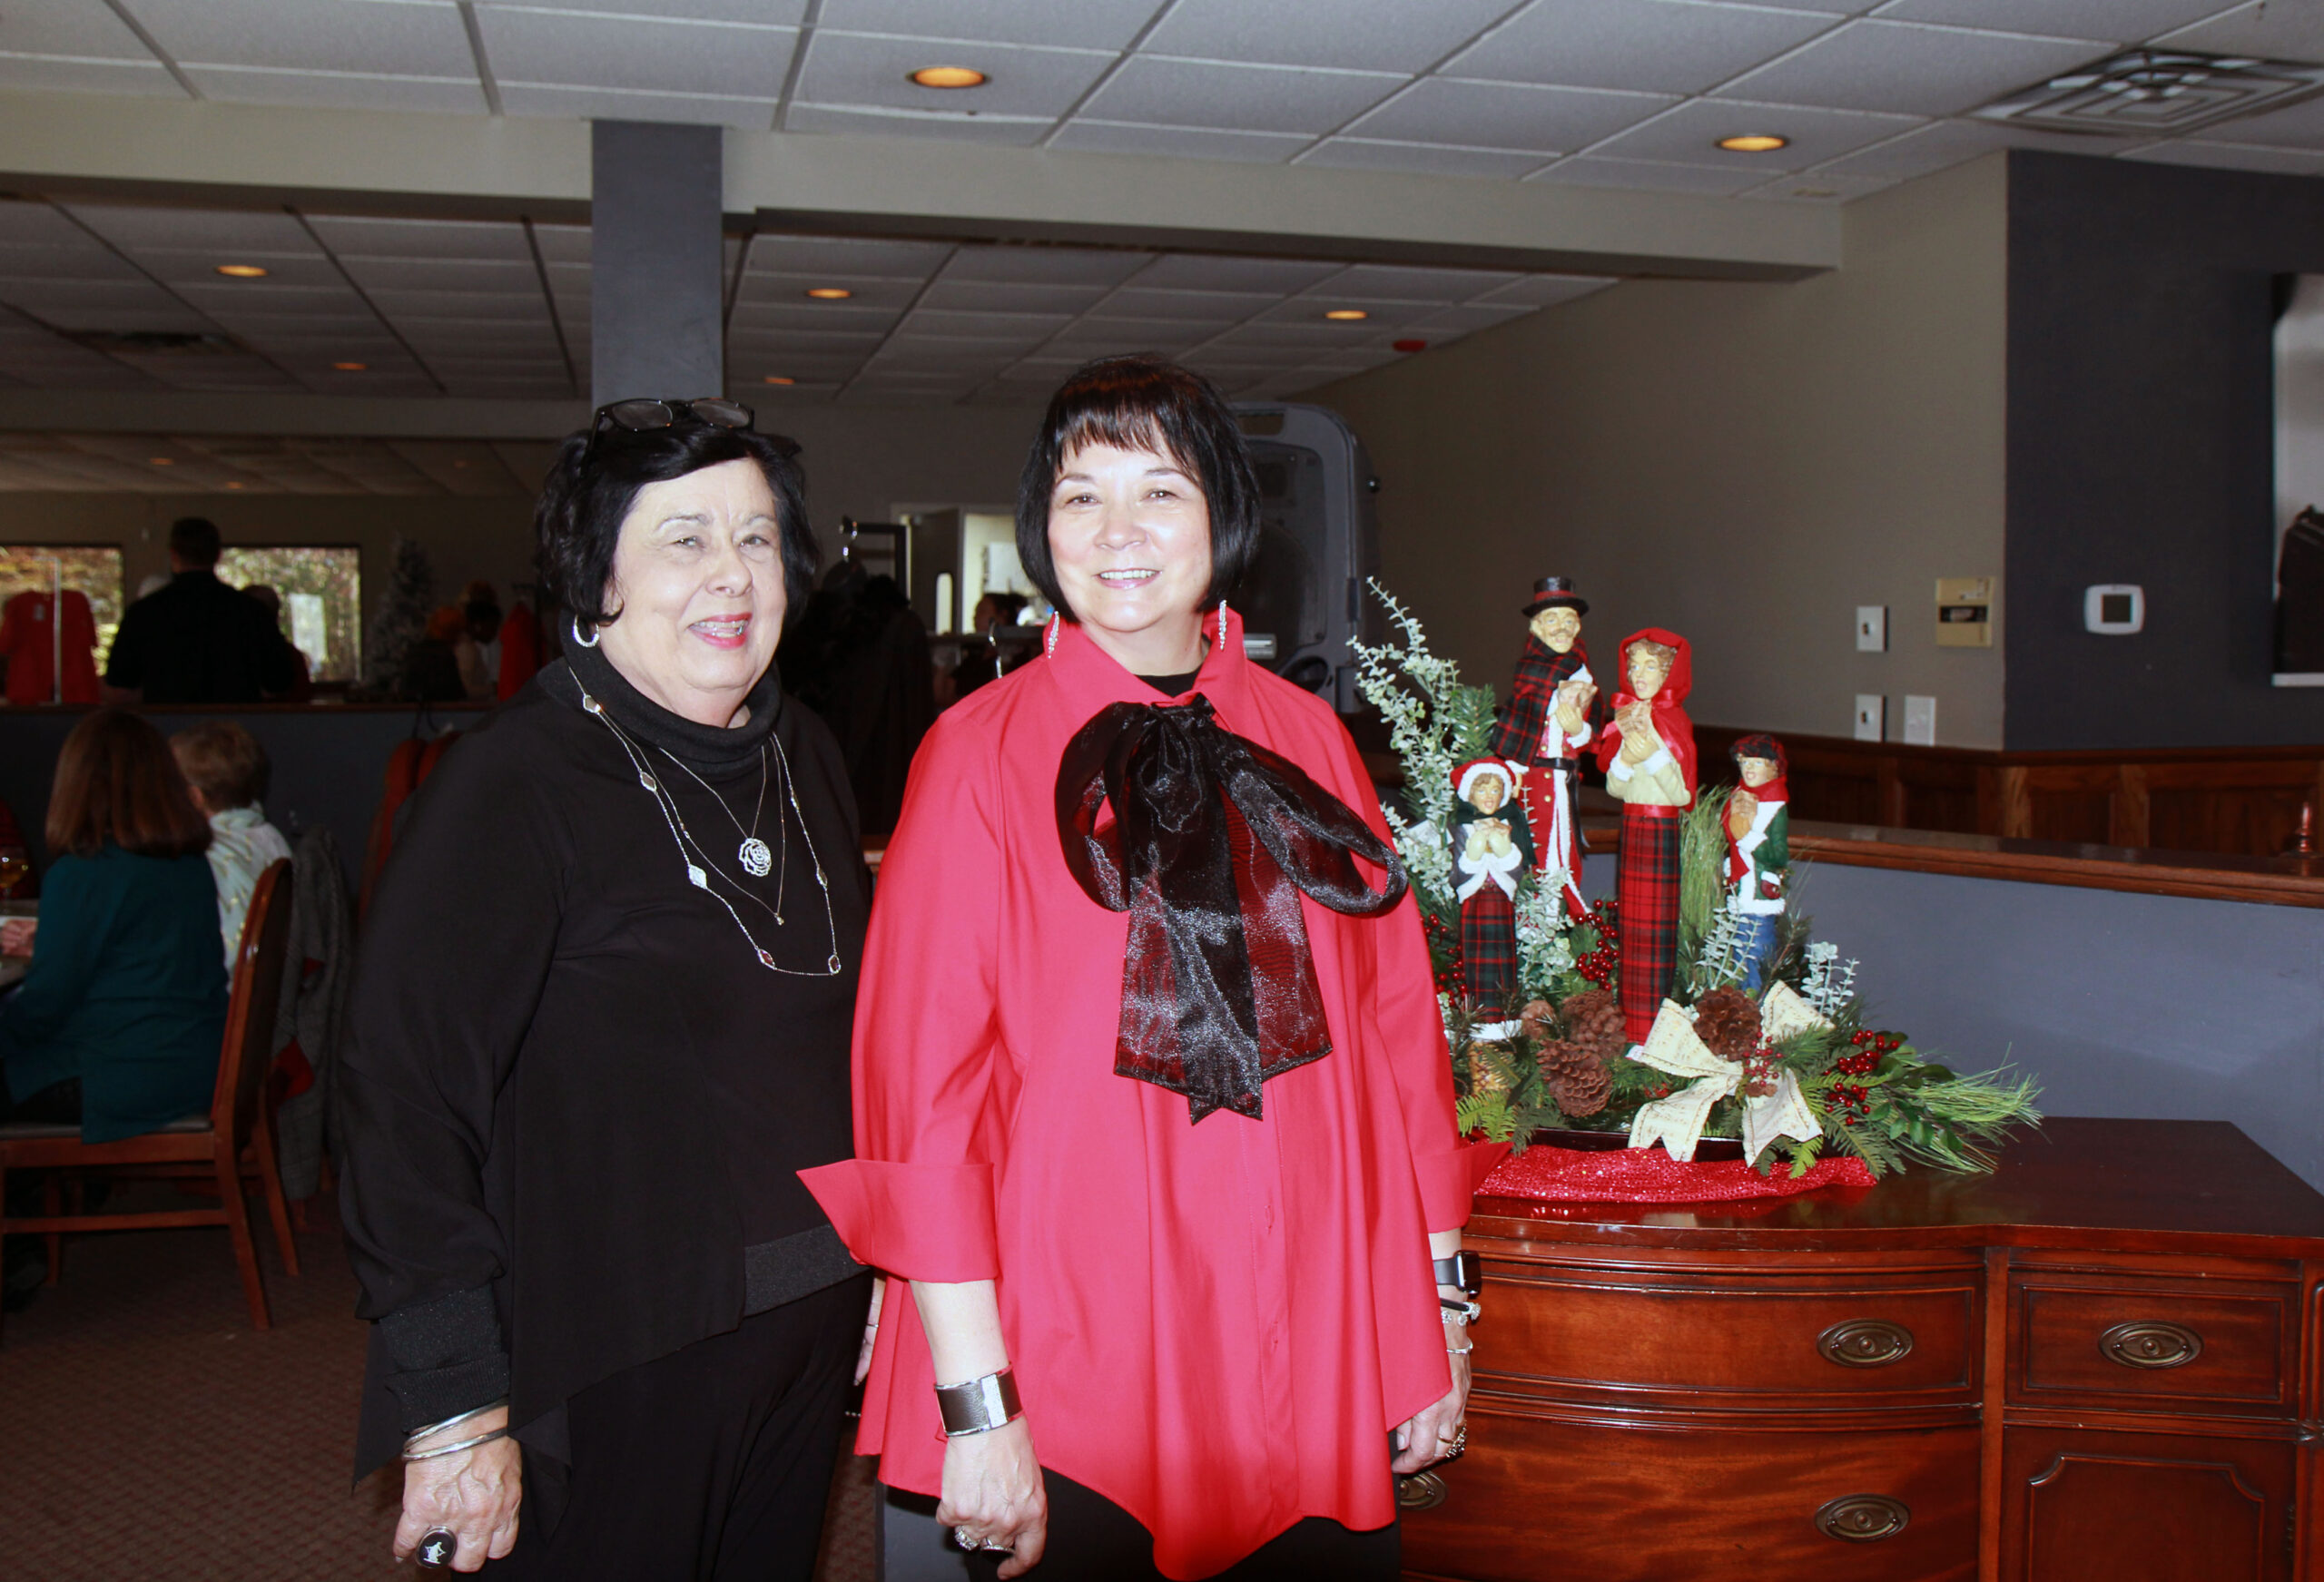 Two women in fine clothing stand in front of table with holiday decorations.